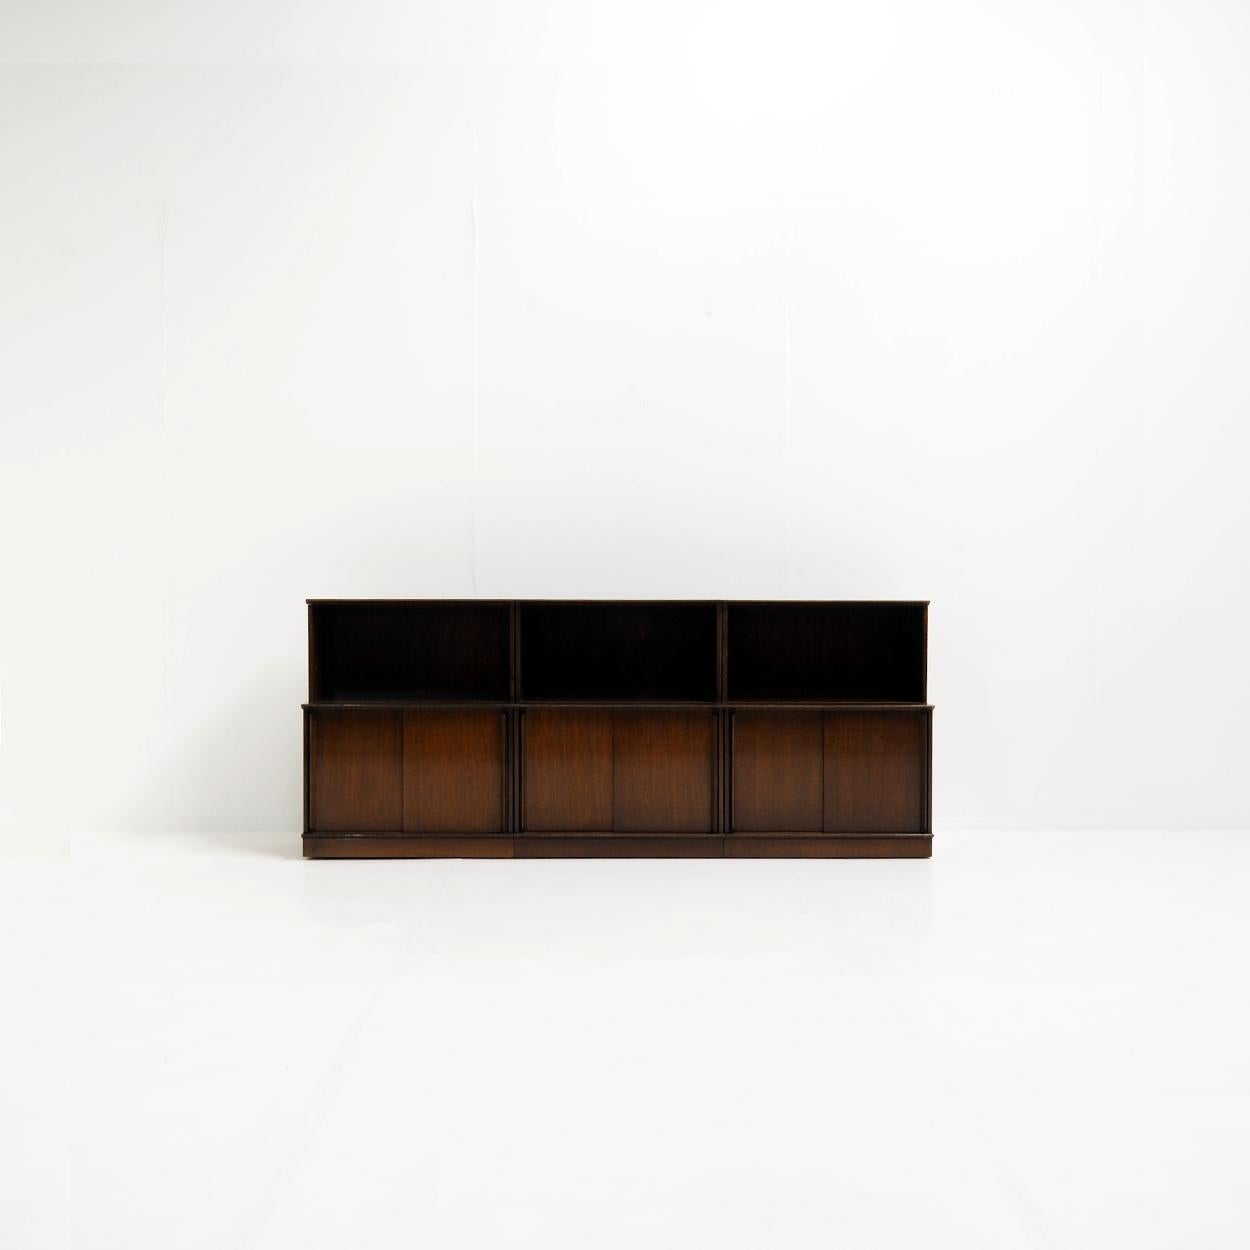 1960’s sideboard designed by the French designer Didier Rozaffy in the style of Le Corbusier. It’s the modular system ‘Le Meuble Oscar’ that was only produced between the late 1950s and the early 1970’s.

This sideboard is made of oak veneer and